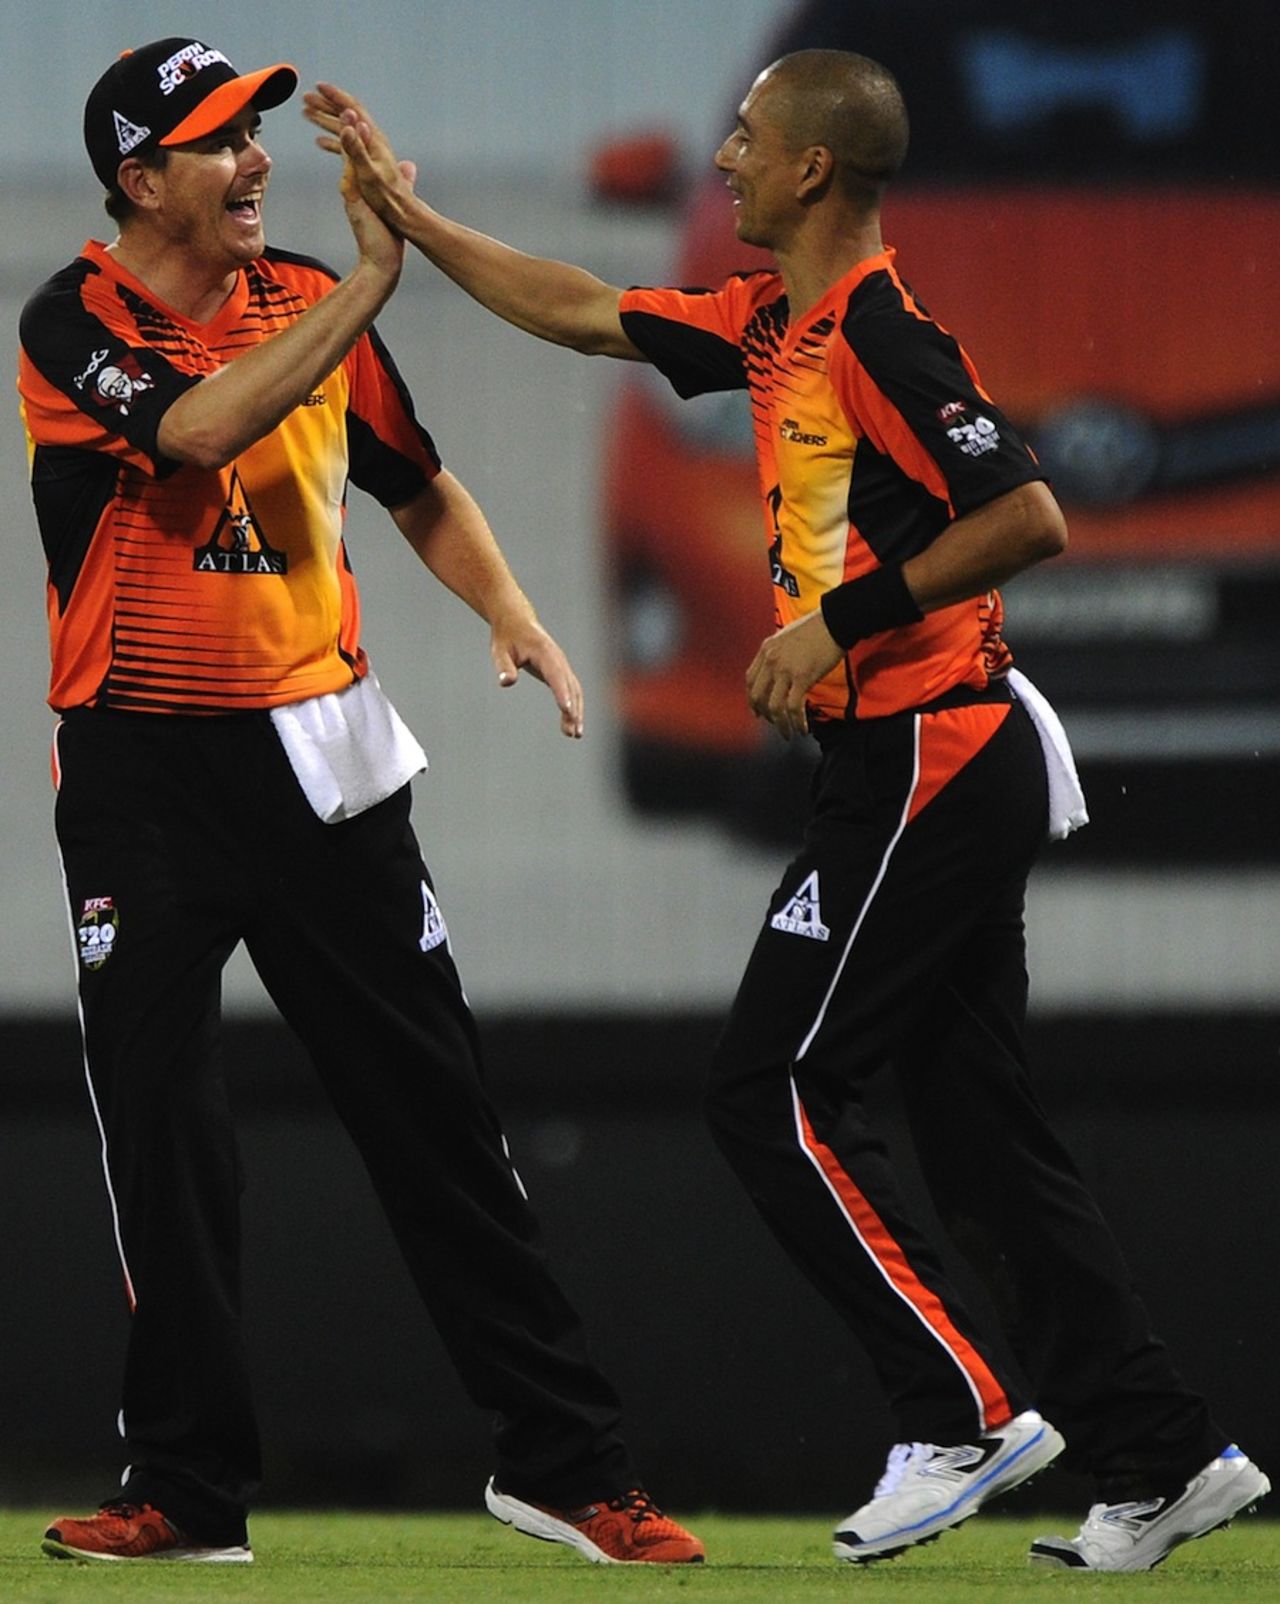 Alfonso Thomas took two wickets in the first over of the match, Brisbane Heat v Perth Scorchers, Big Bash League, December 18, 2012